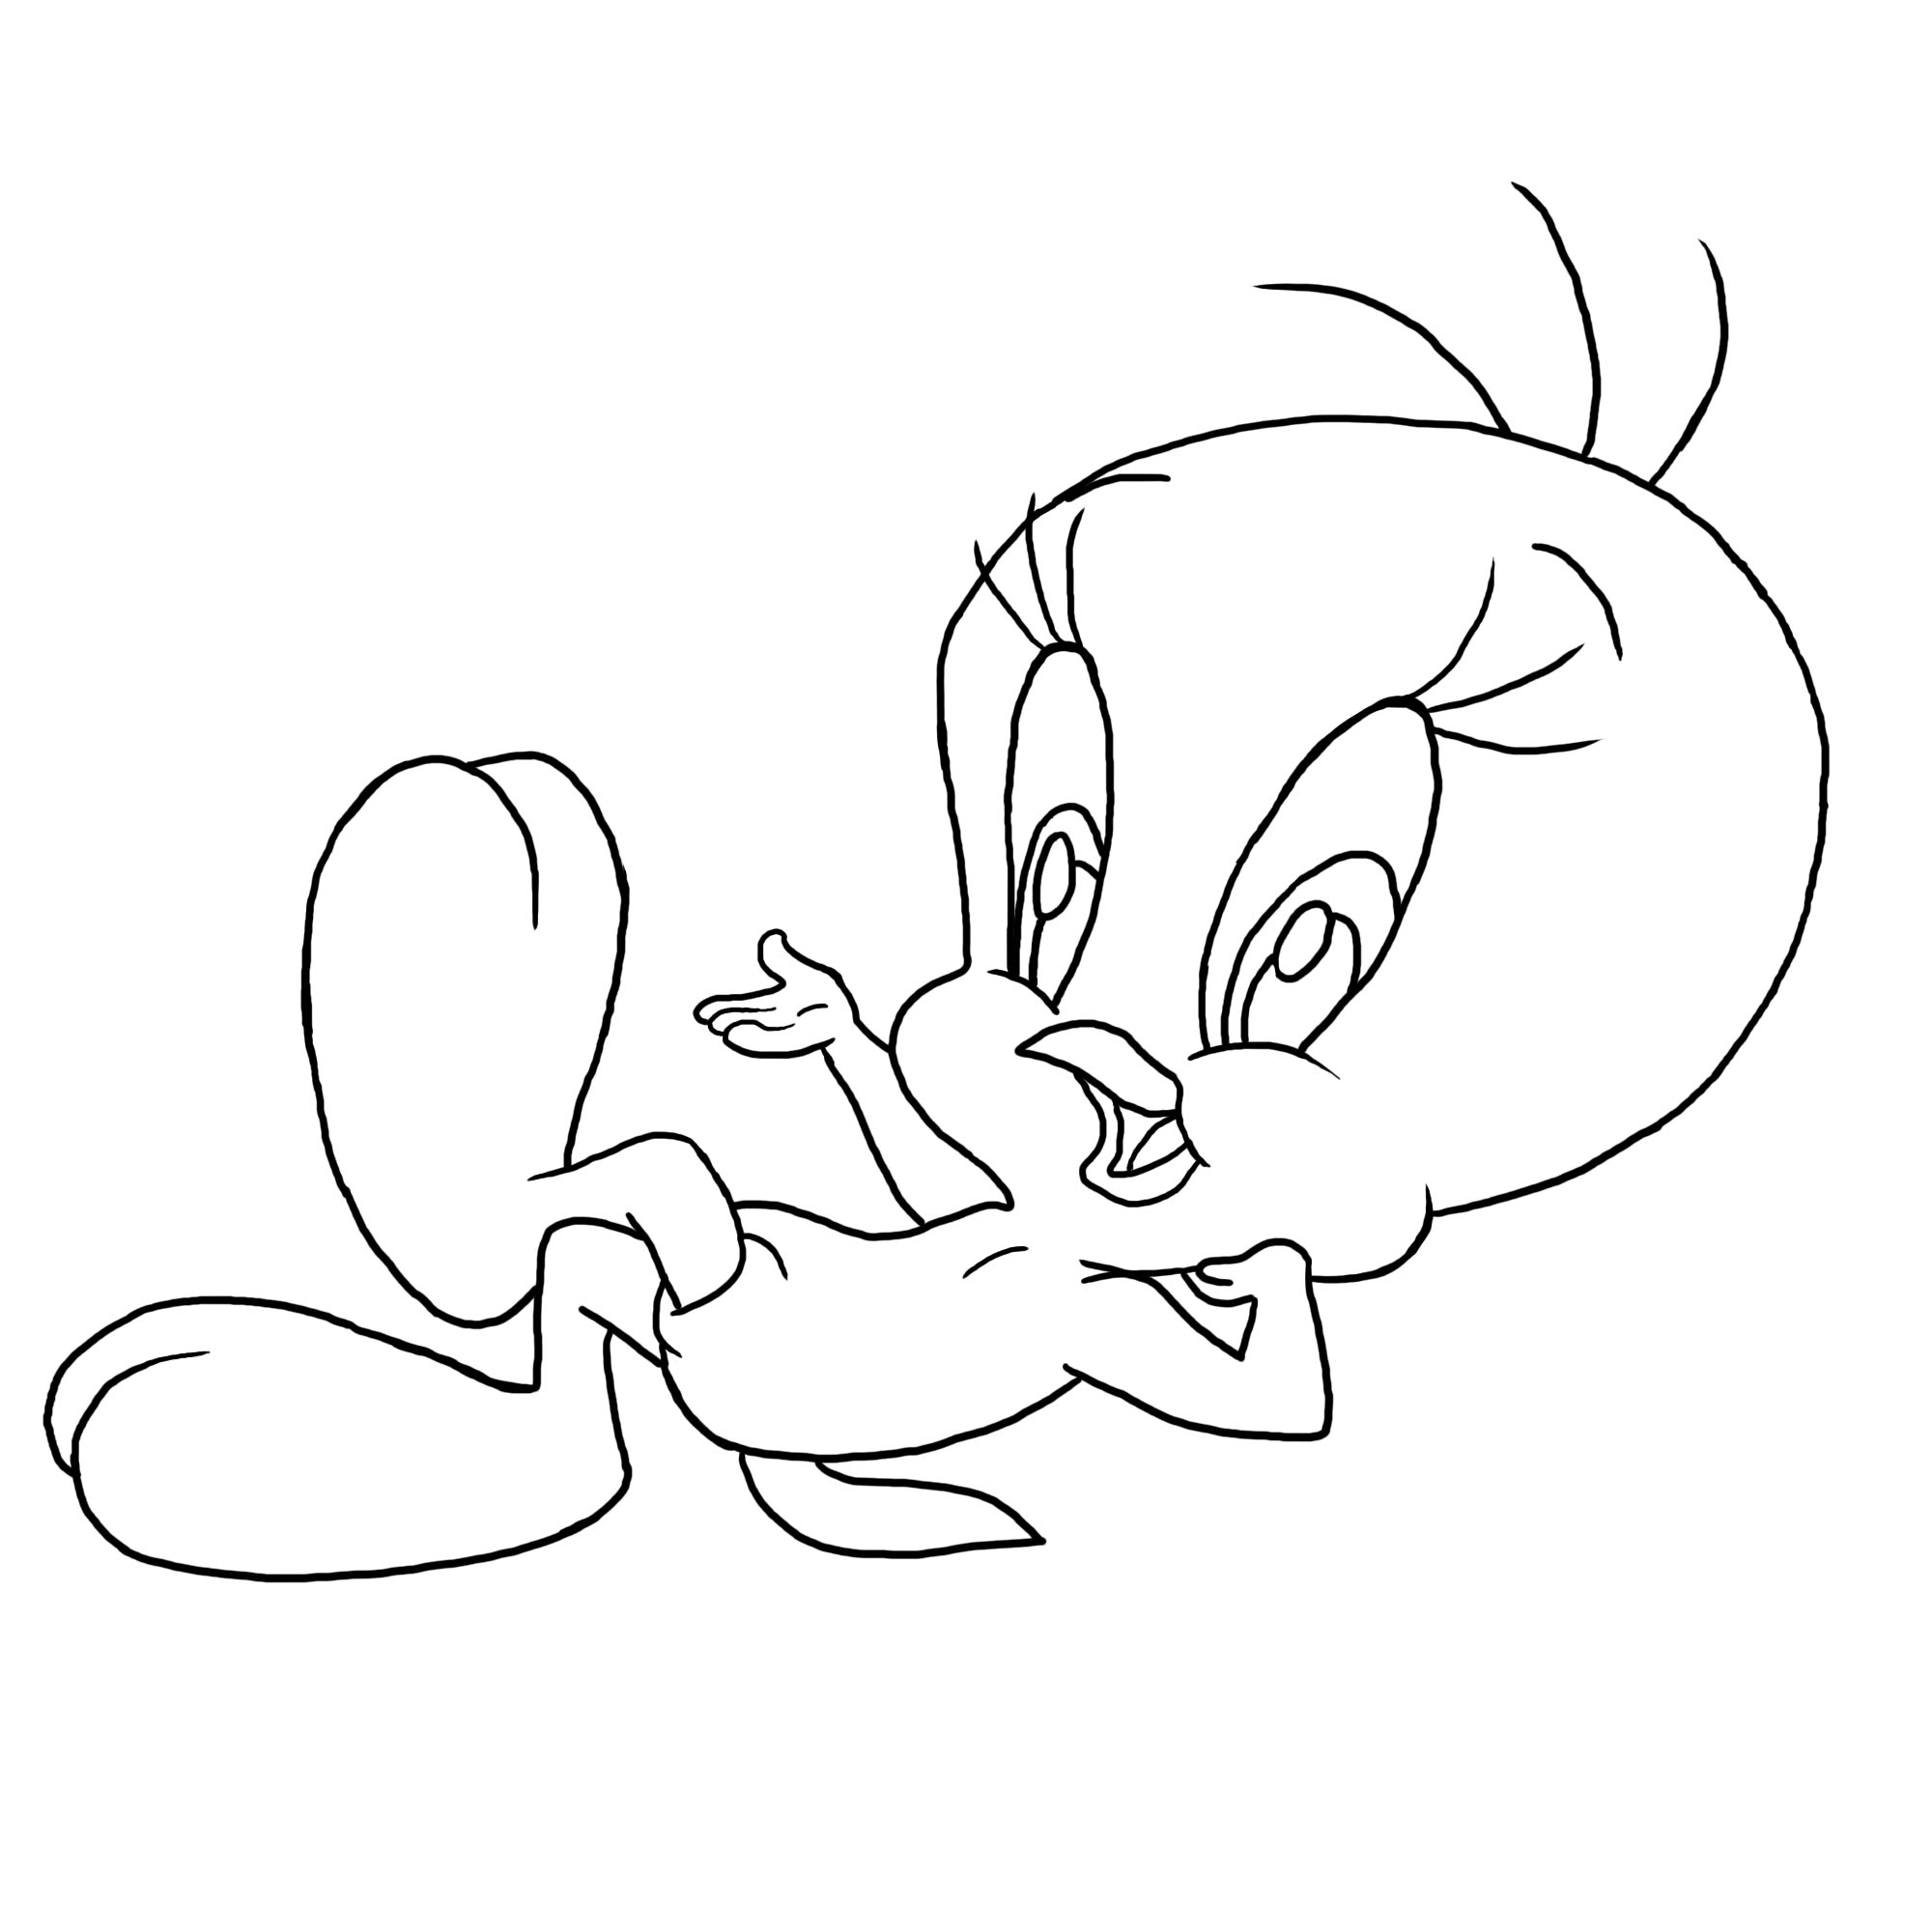 coloring-pages-tweety-bird-free-printable-coloring-pages-free-and